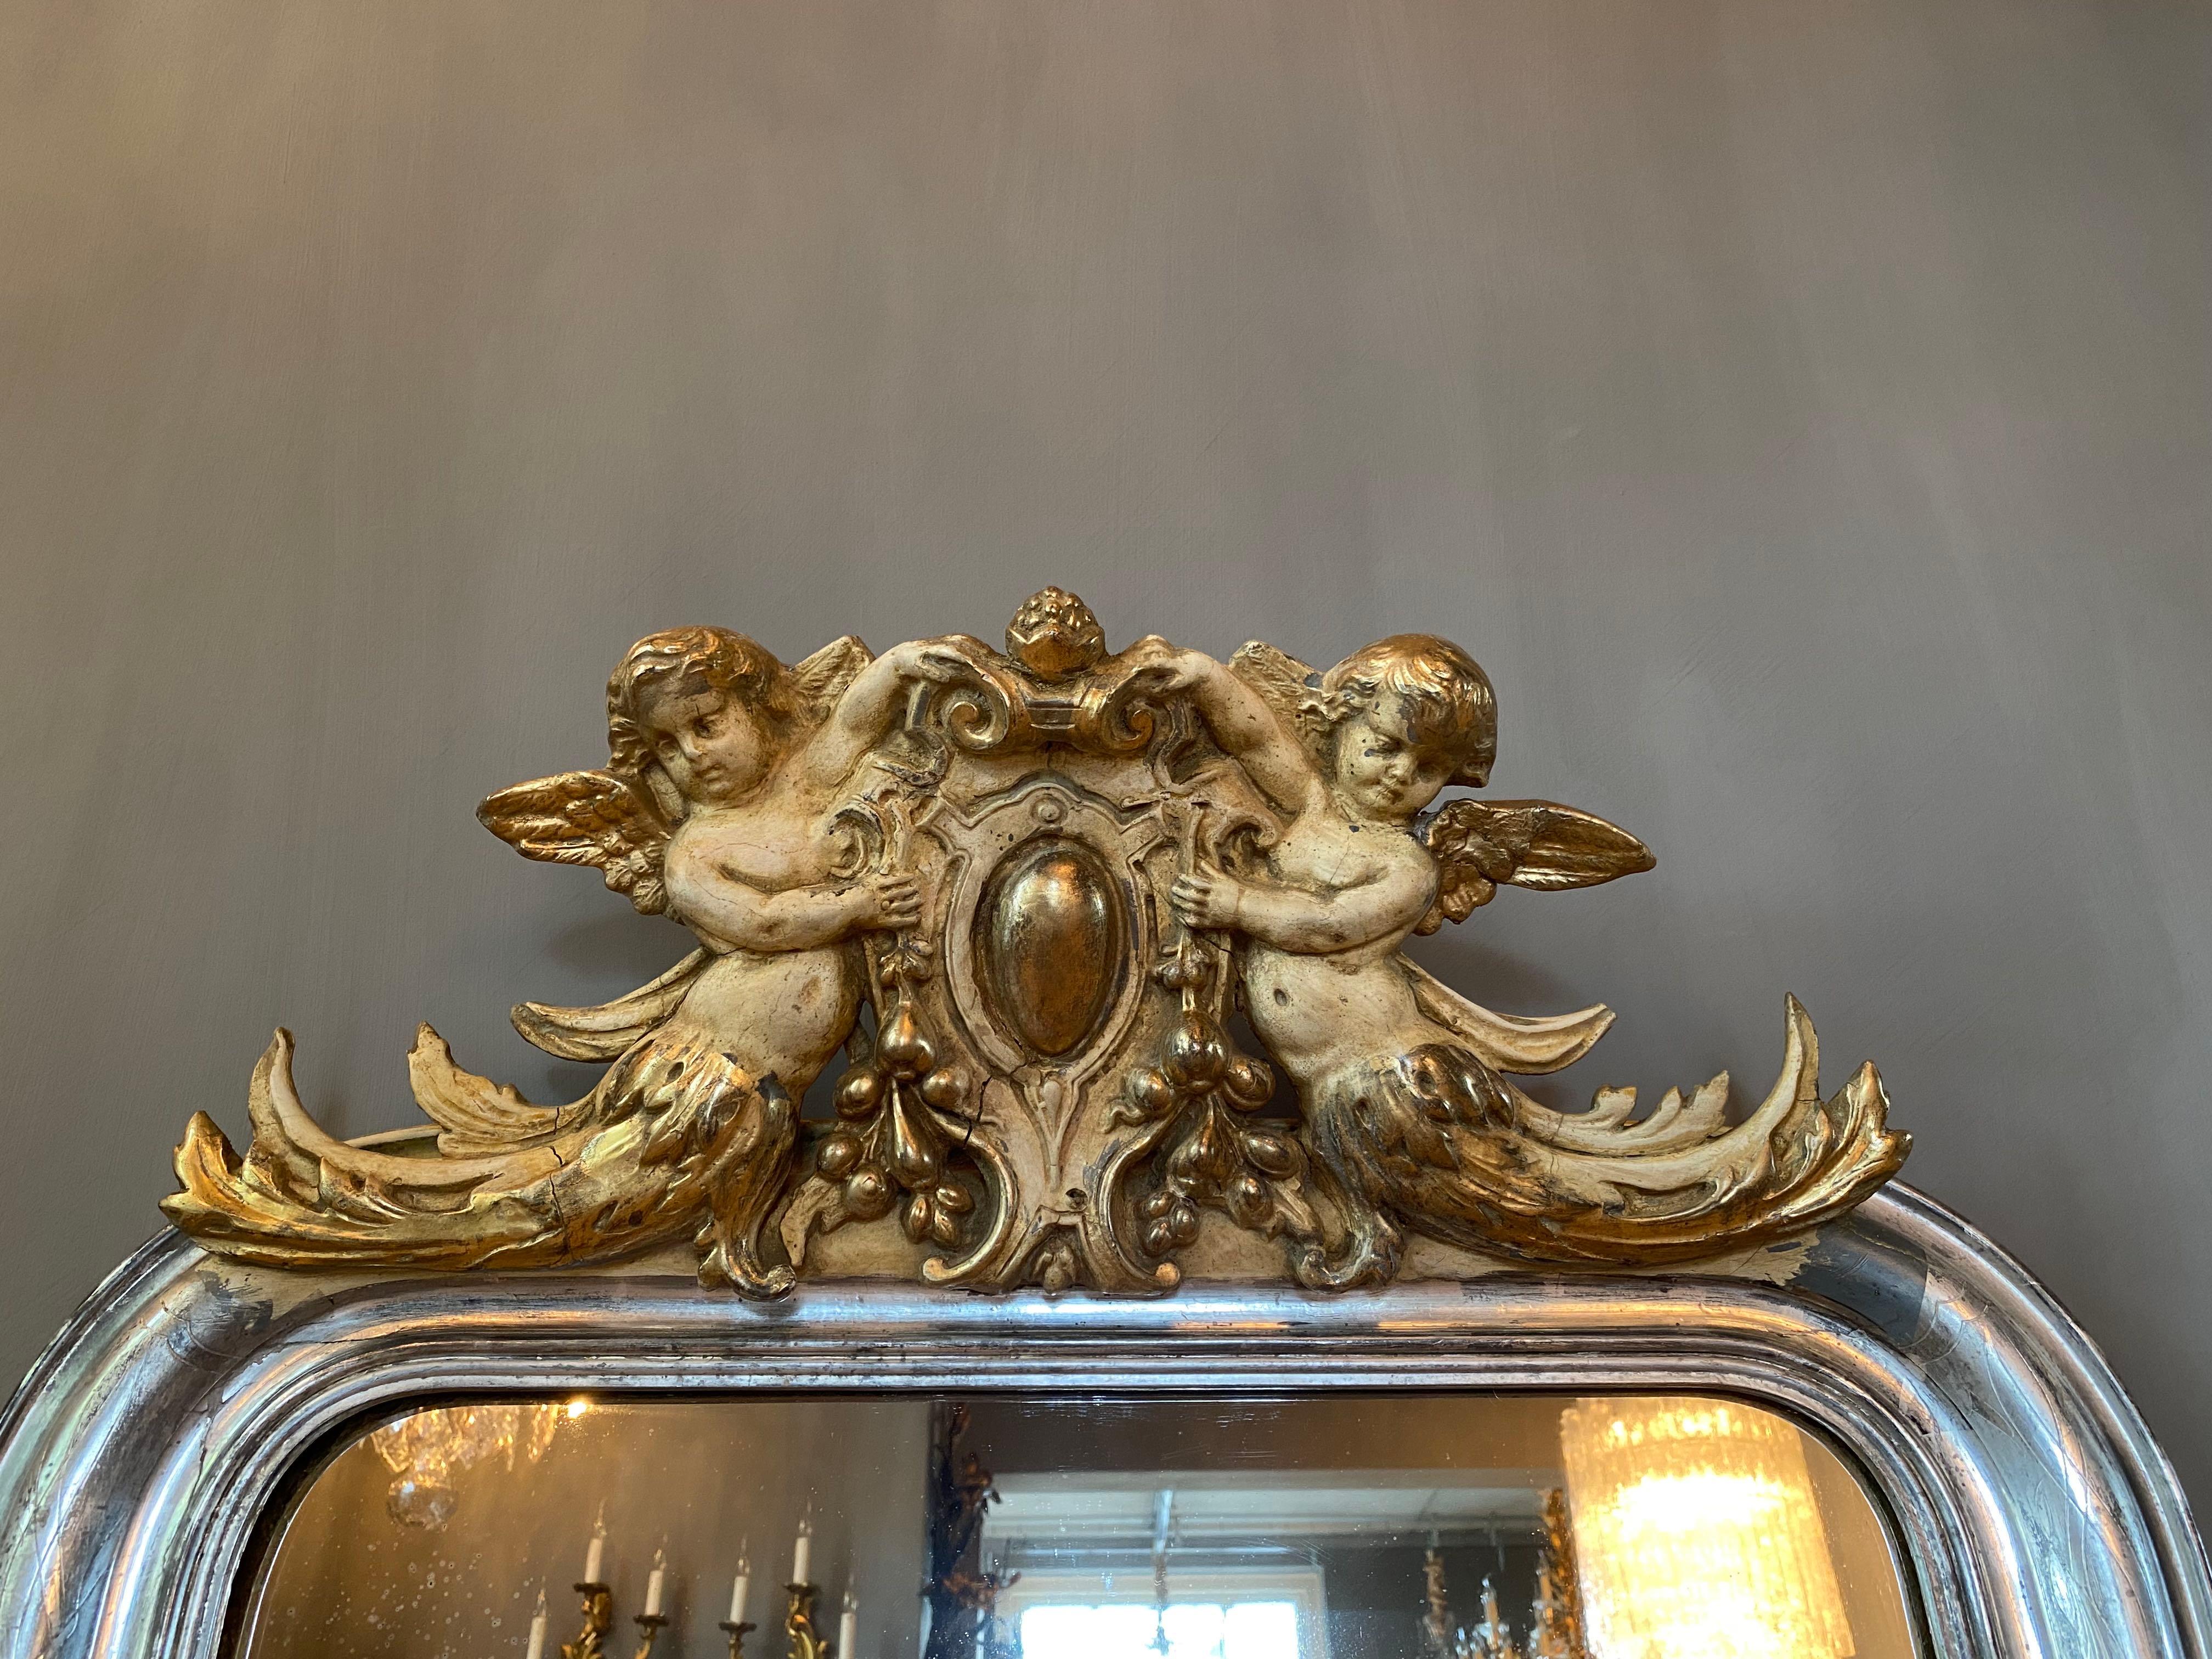 19th century silver leaf gilt French mirror with a crest with putti 1